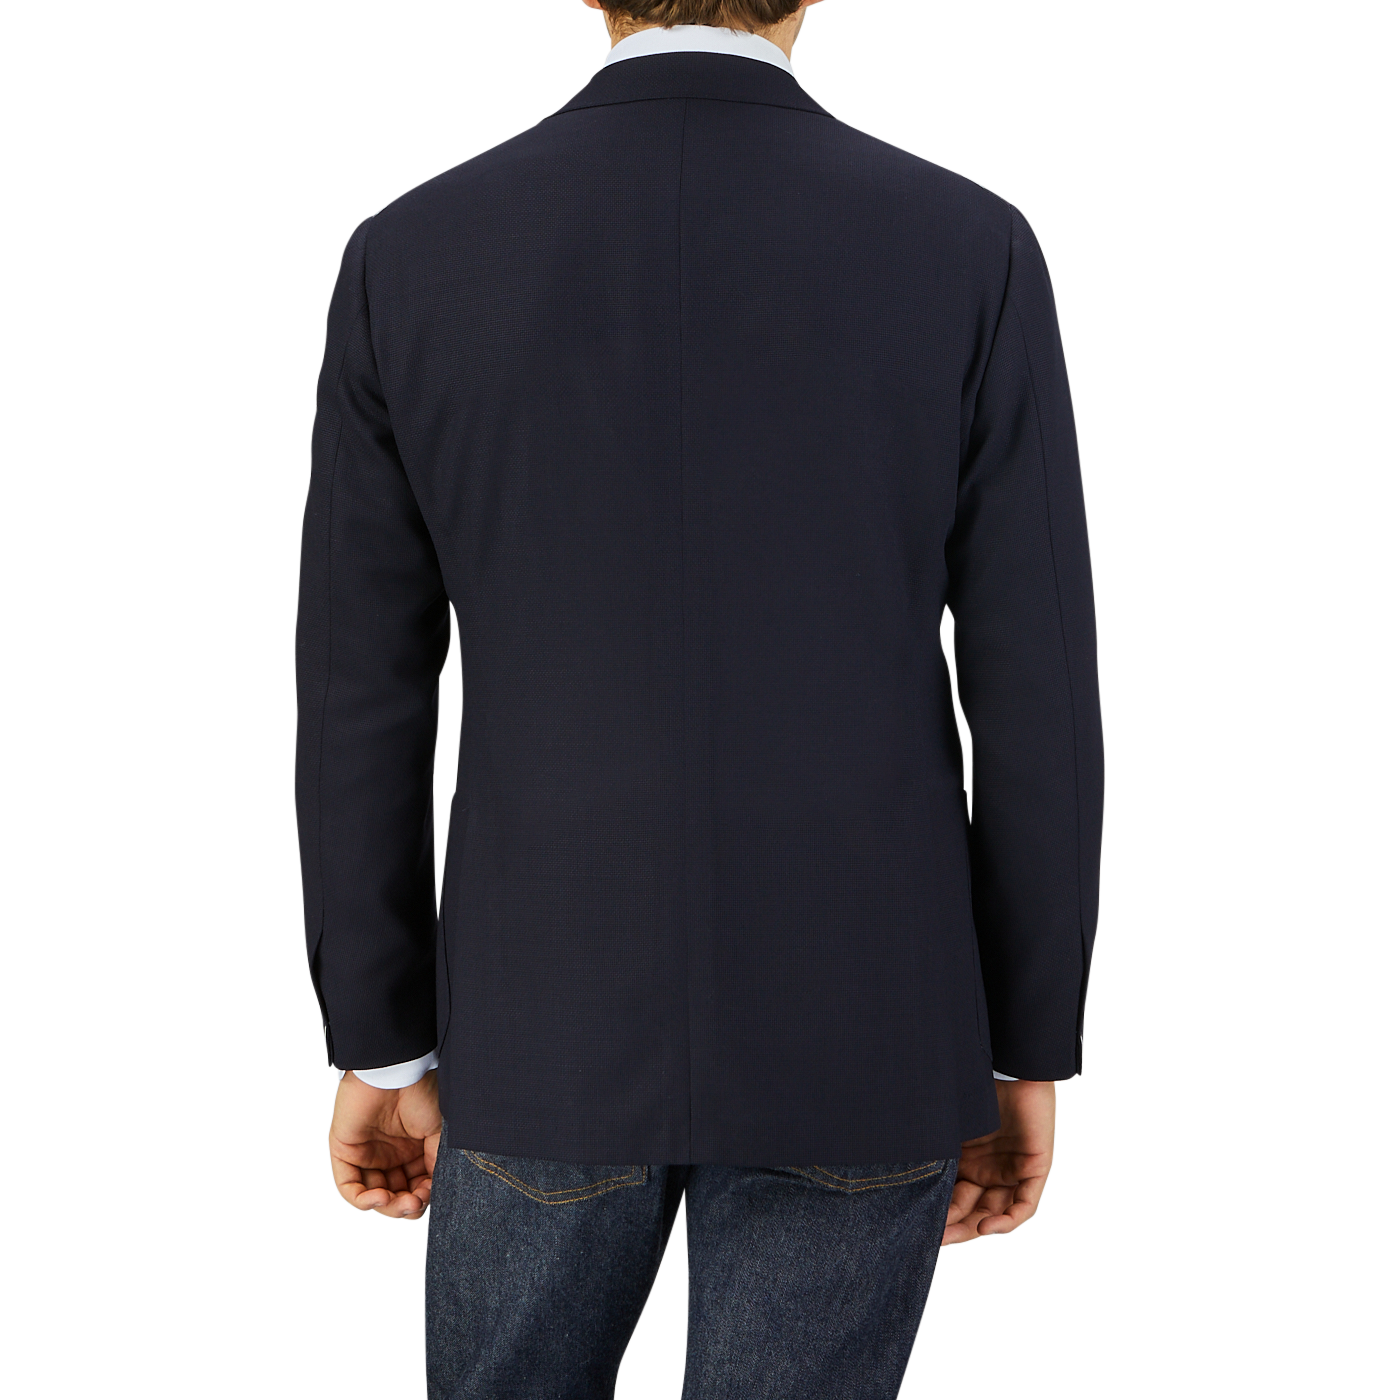 Rear view of a man wearing a Ring Jacket Navy Blue Wool Balloon Travel Blazer and jeans, standing against a light grey background.